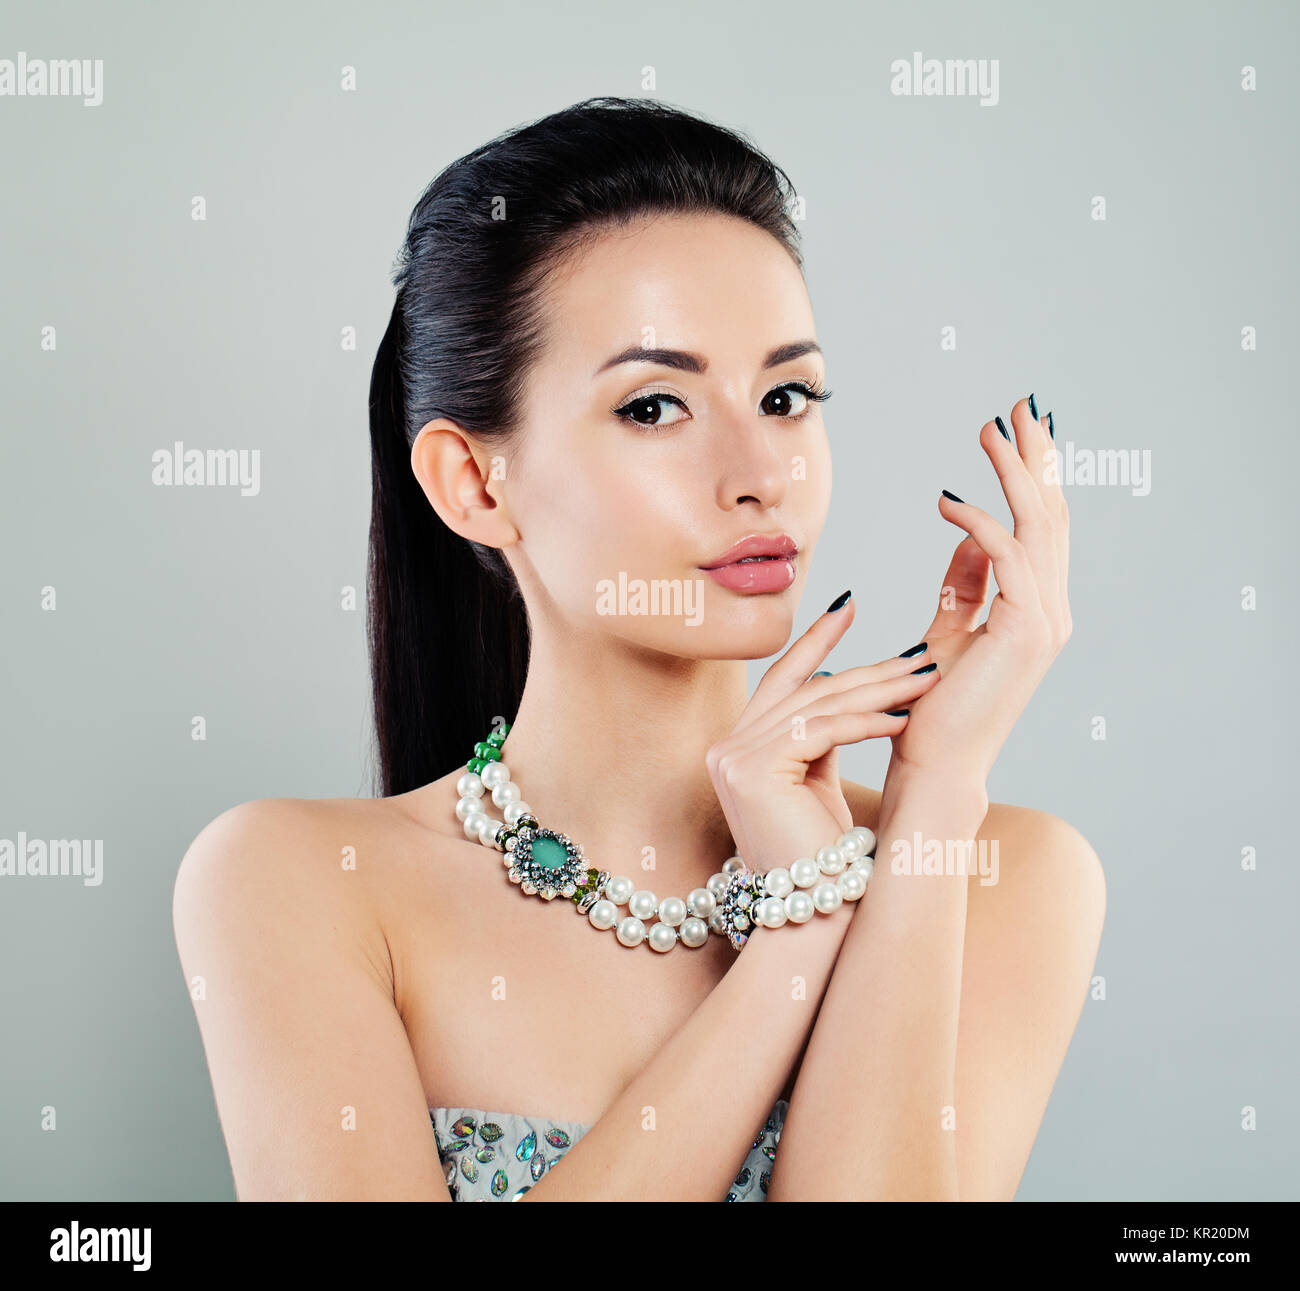 Beautiful Woman with Makeup and Pearls Jewelry Stock Photo